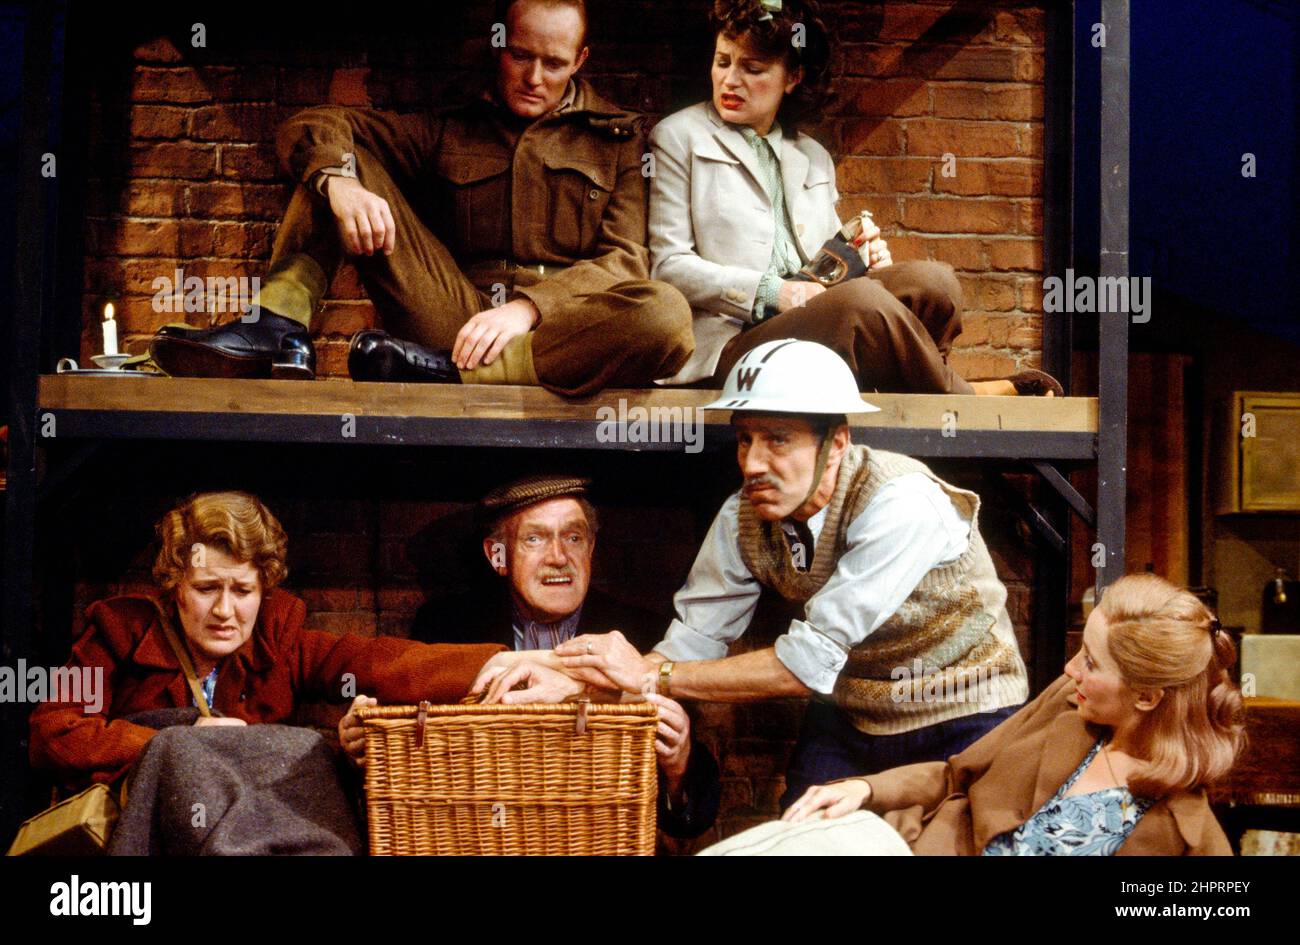 top: Christian Rodska (Eric), Veronica Sowerby (Joyce)  below, l-r: Patricia Routledge (Peggy), Roger Avon (Andy), Arthur Blake (George), Gemma Jones (Helen) in AND A NIGHTINGALE SANG by C P Taylor at the Queen’s Theatre, London W1  17/07/1979  design: Geoffrey Scott  lighting: Leonard Tucker  director: Mike Ockrent Stock Photo